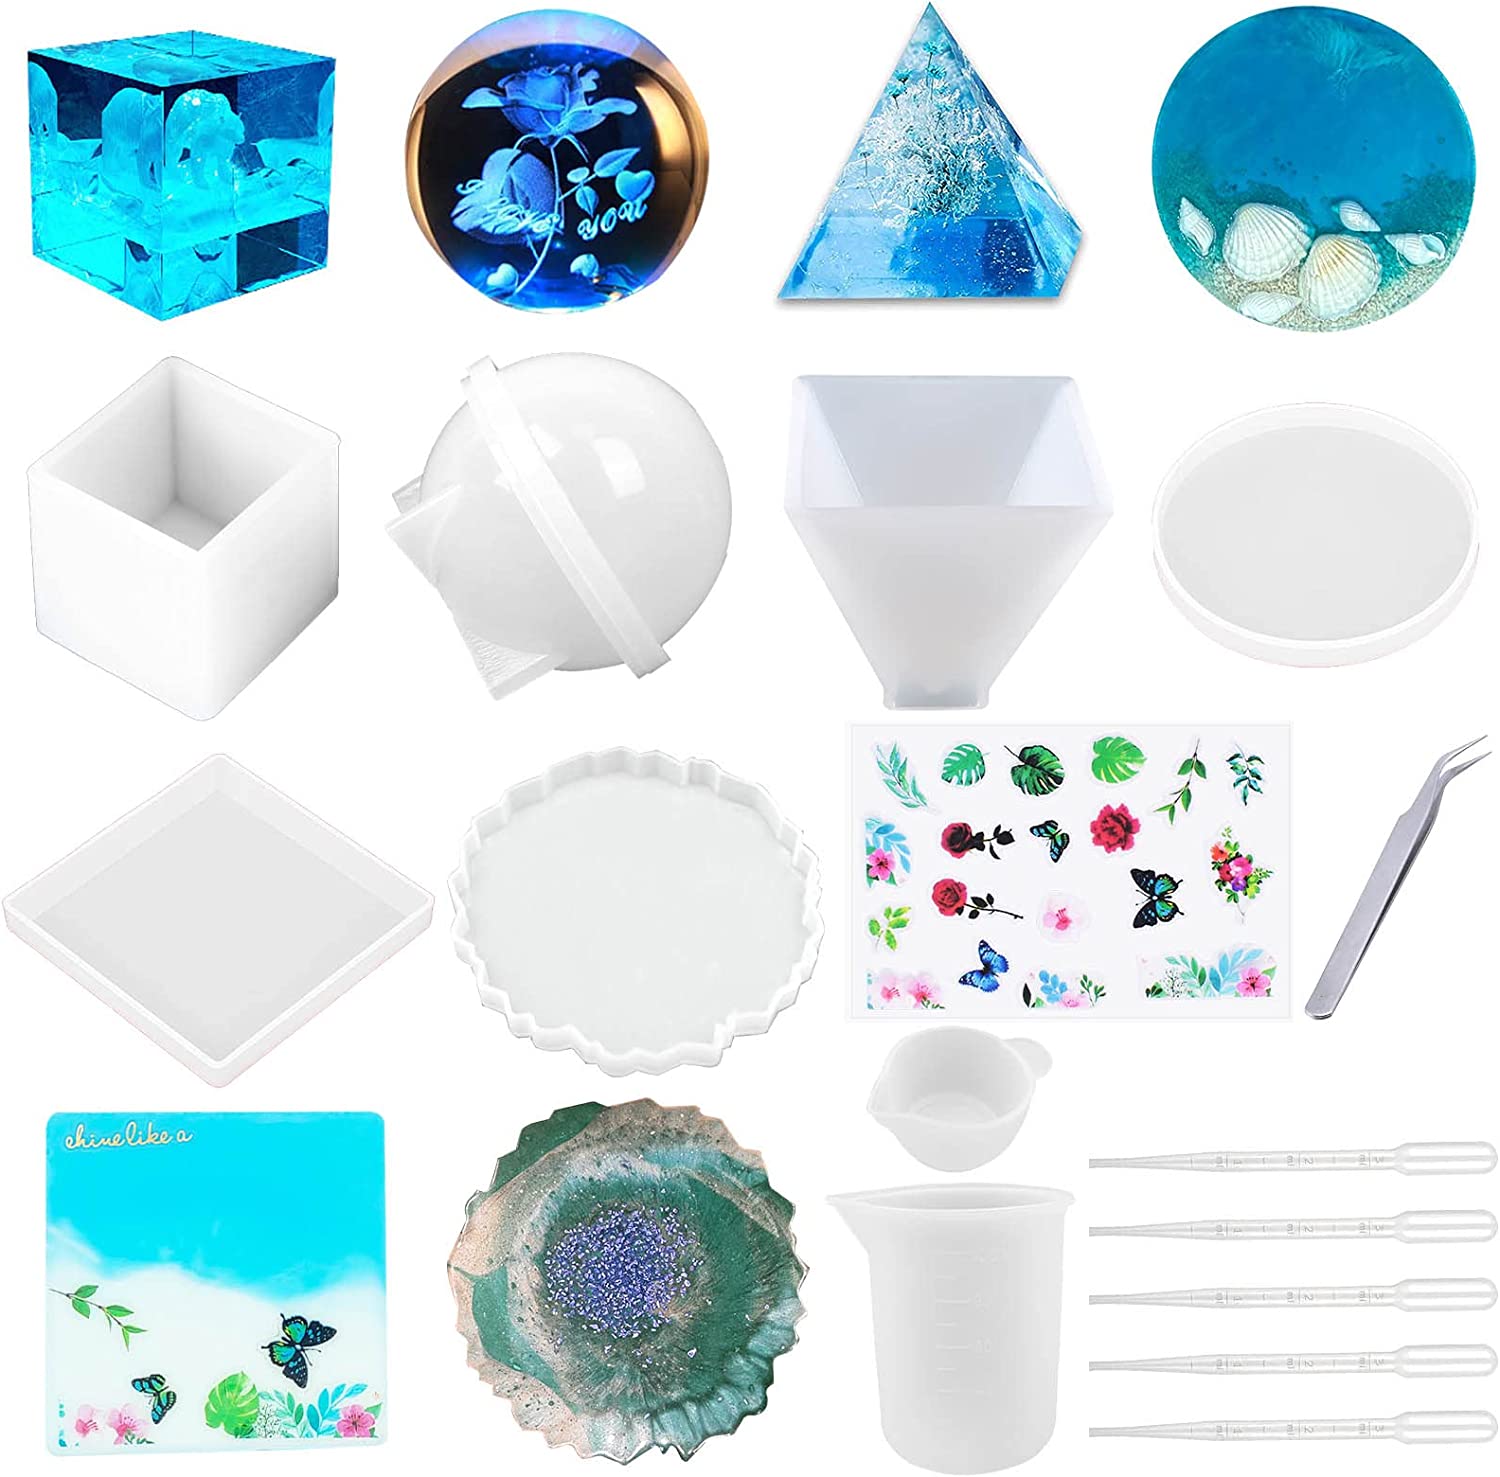  Modda Epoxy Resin Kit with Video Course, Includes